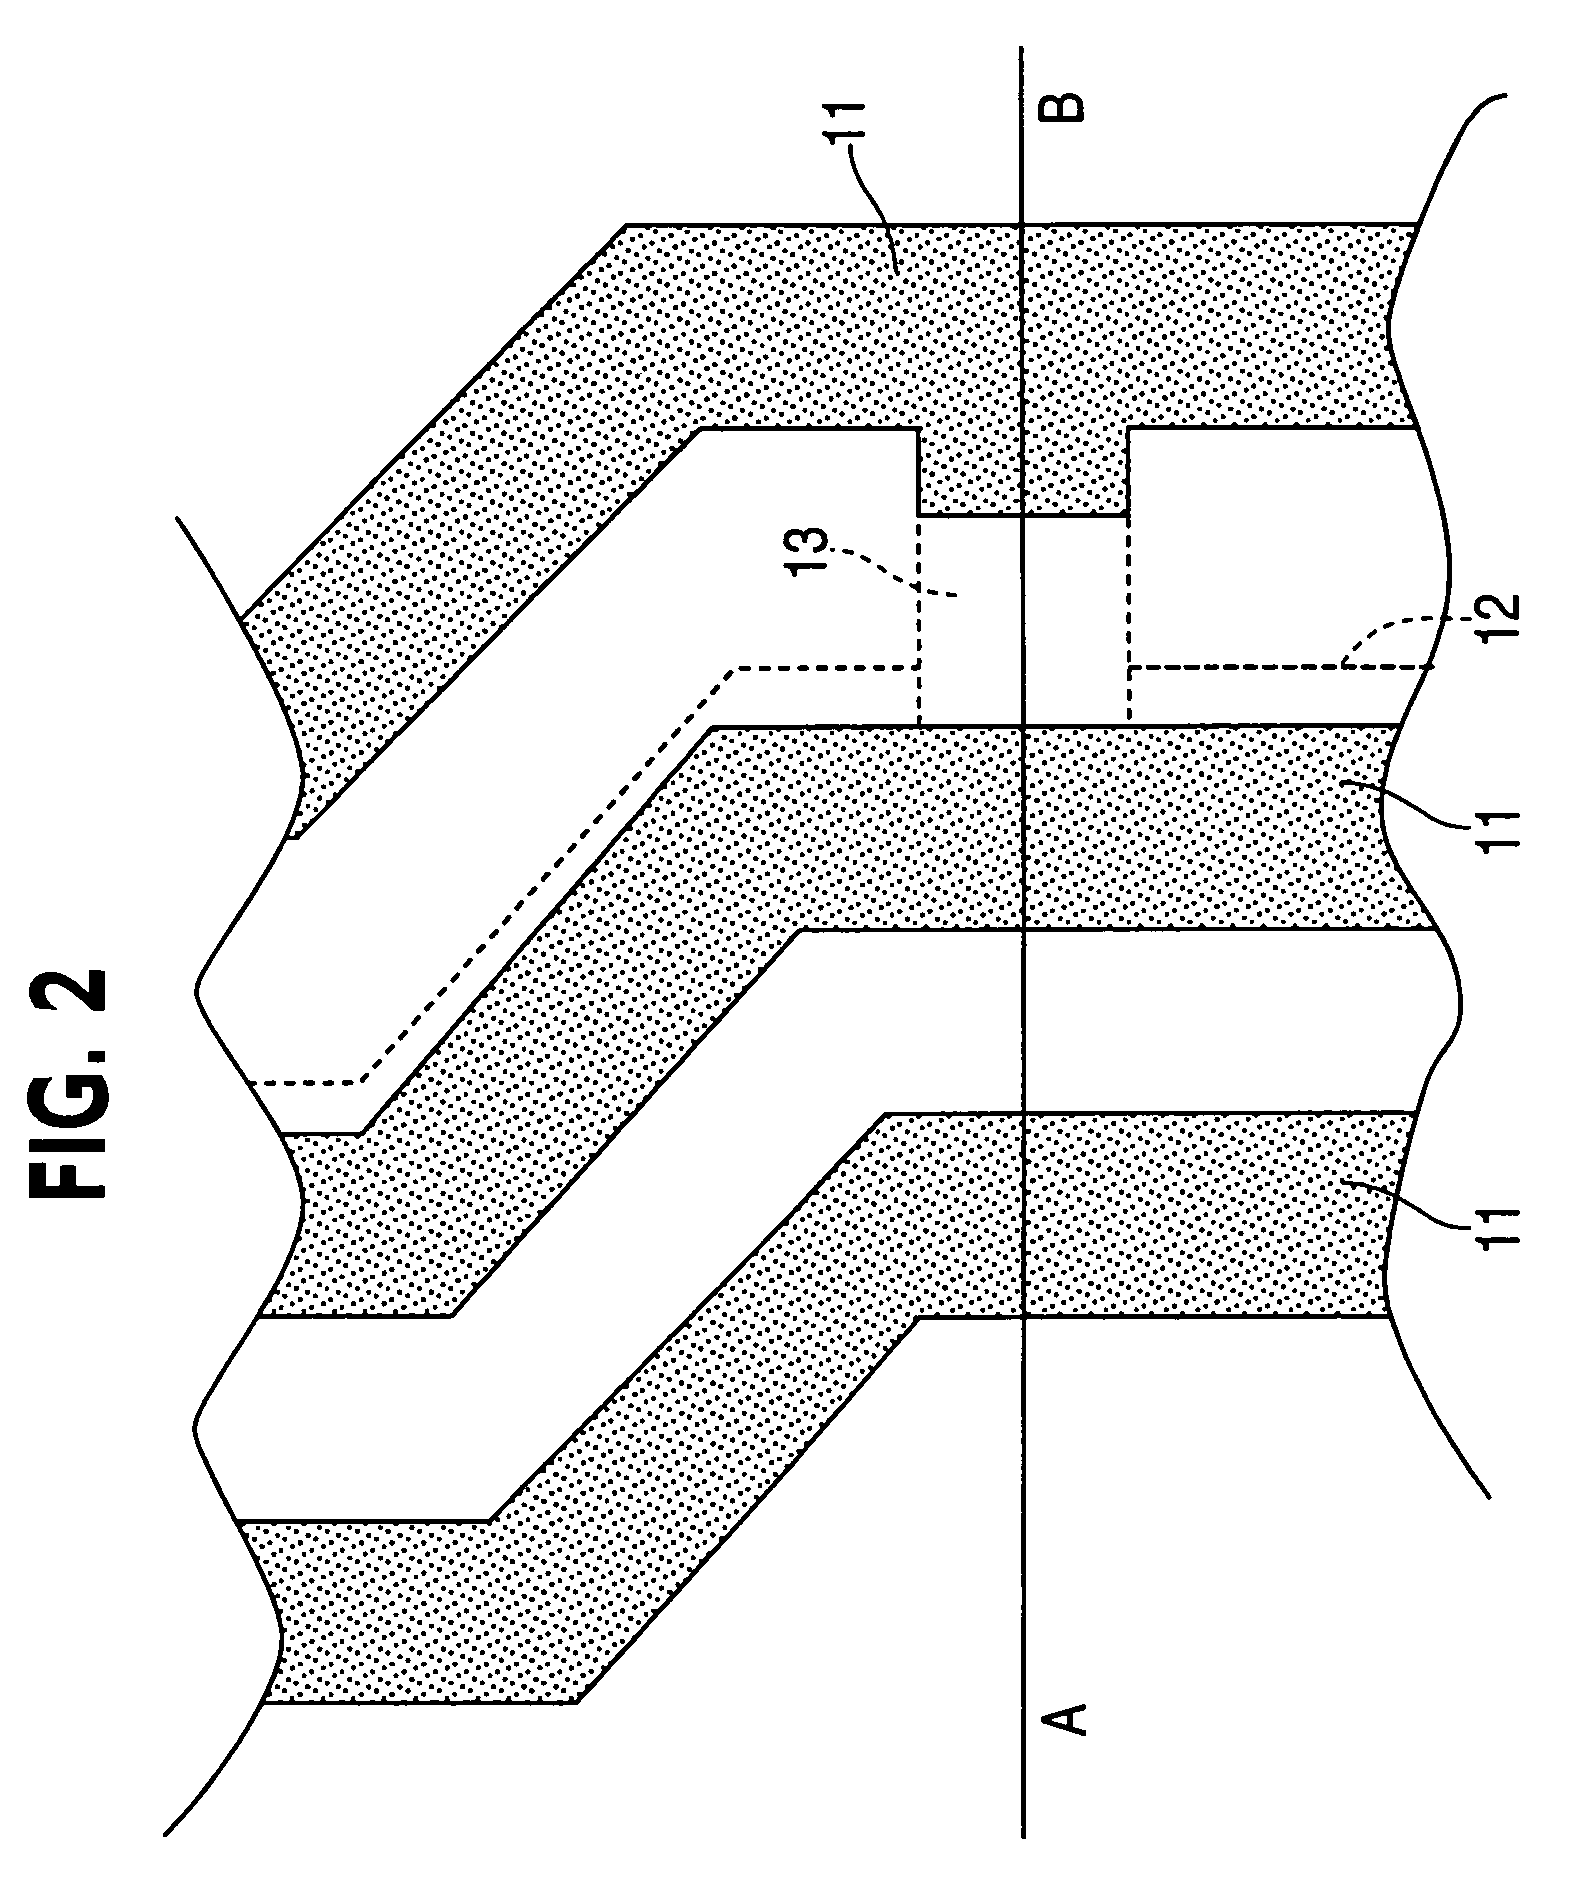 Multilayer interconnection structure and method for forming the same